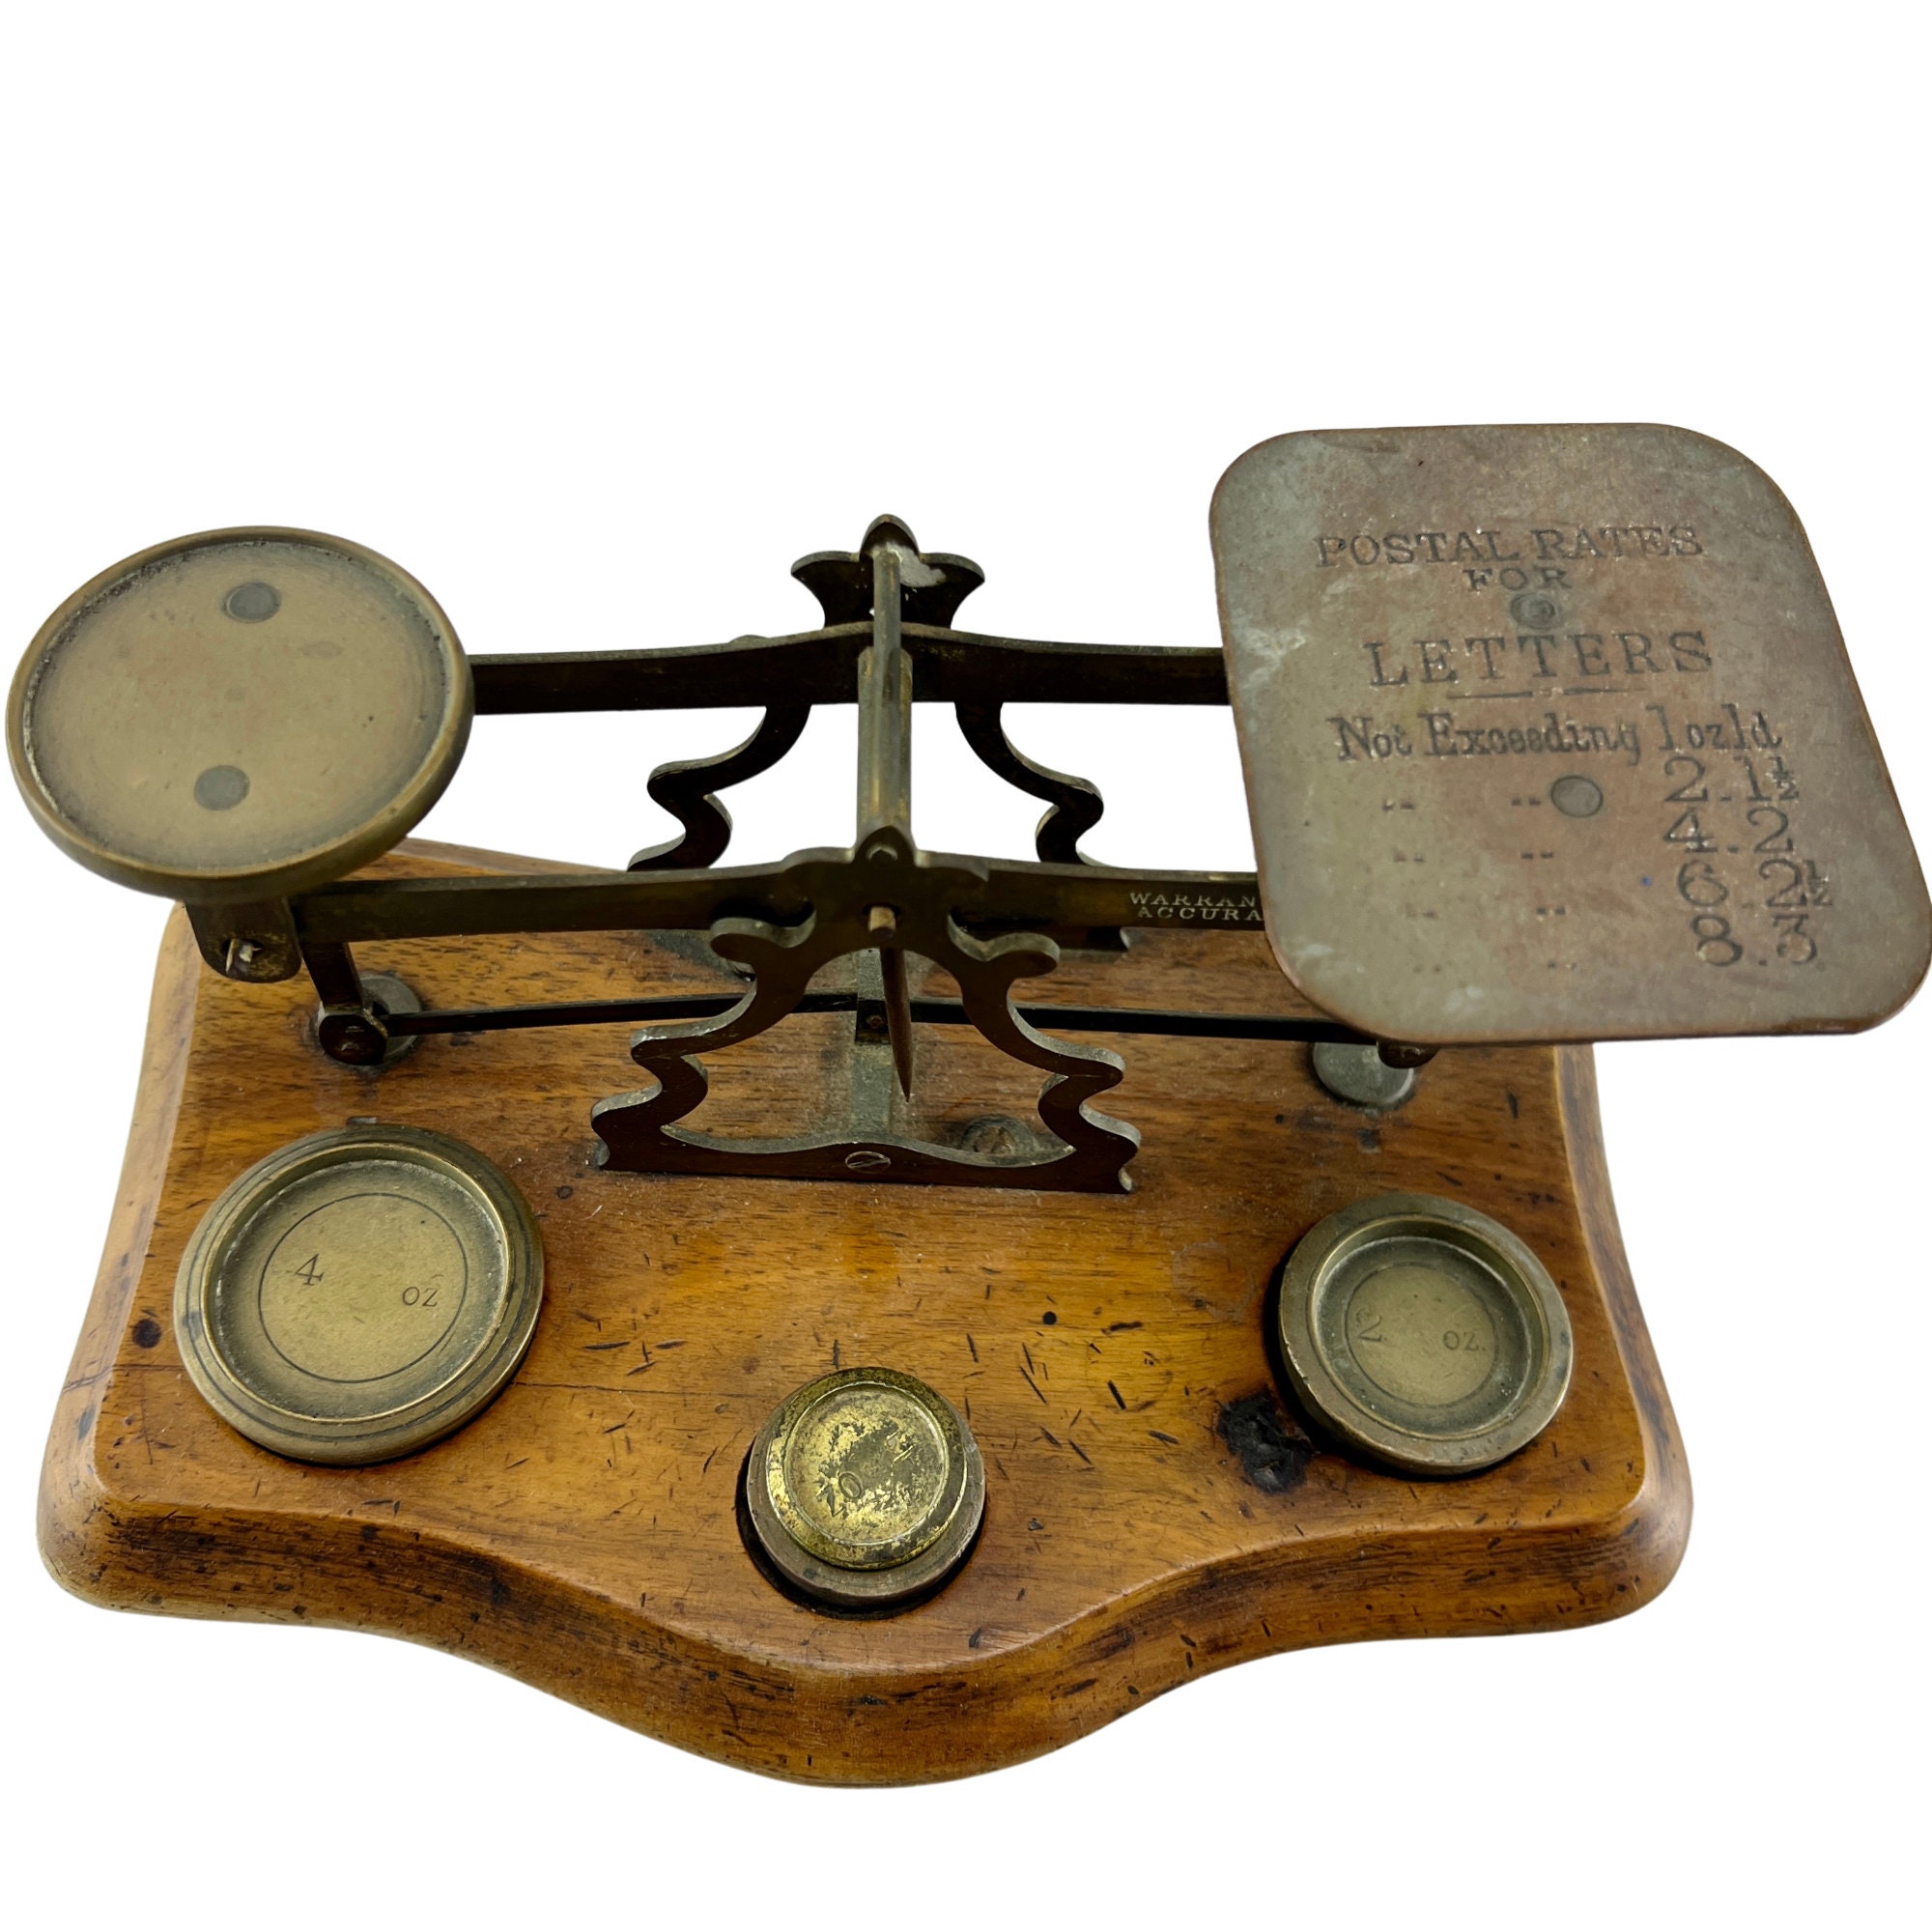 Vintage Pelouze Scale Mfg Co Miniature Star Postal Scales ,chicago Patent  1896, Small Letter Scales 